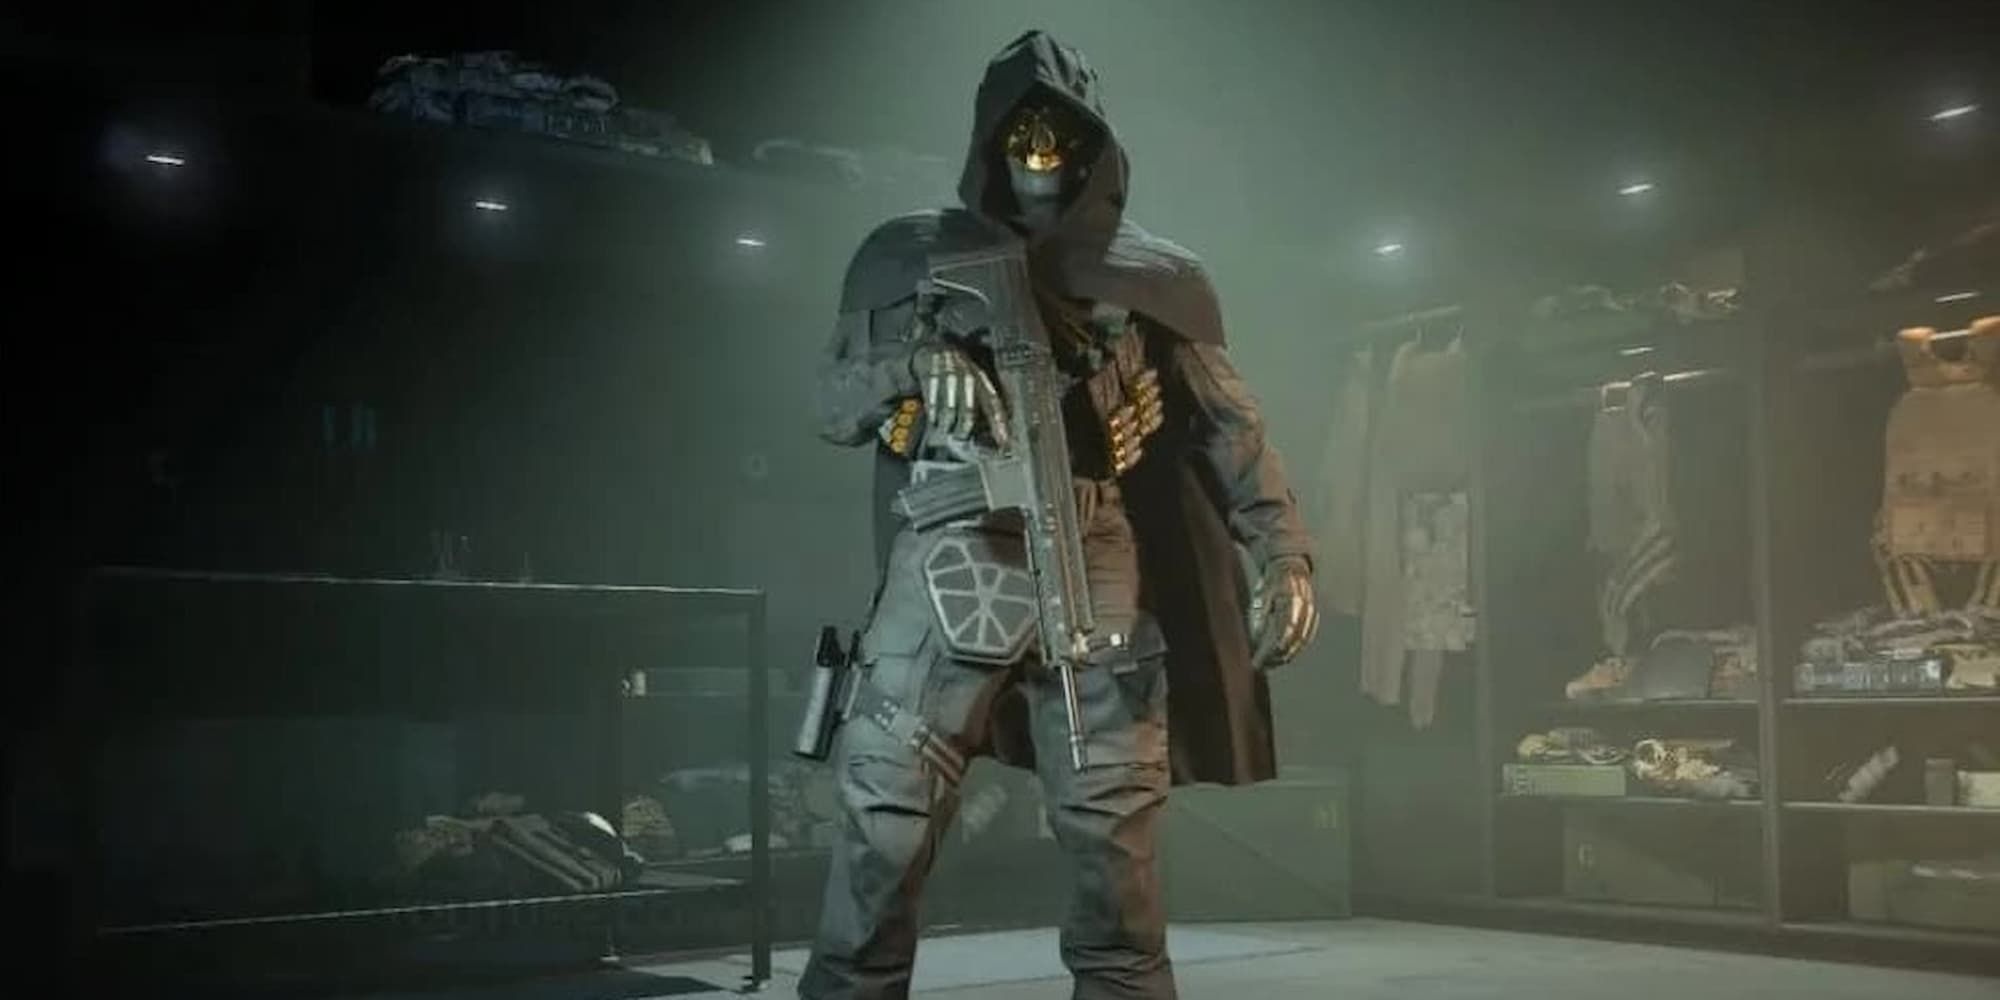 The Gilded Reaper Operator skin for Ghost in MW2 is in his signature stance with one hand holding his weapon.